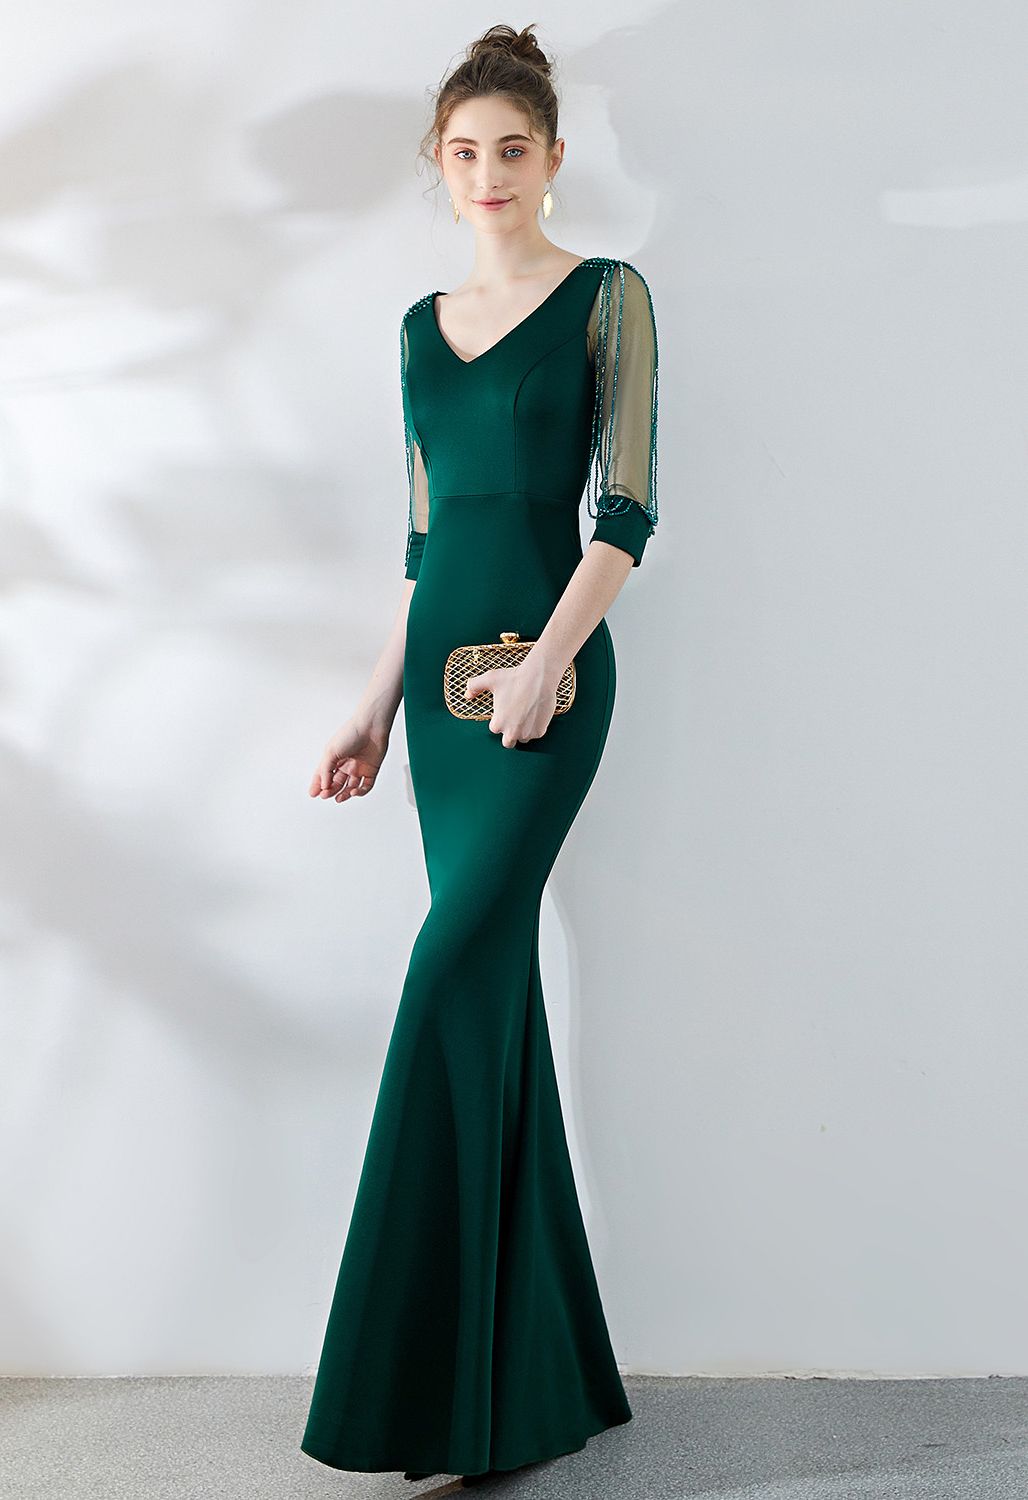 Draped Bead Mesh Sleeve Gown in Emerald - Retro, Indie and Unique Fashion